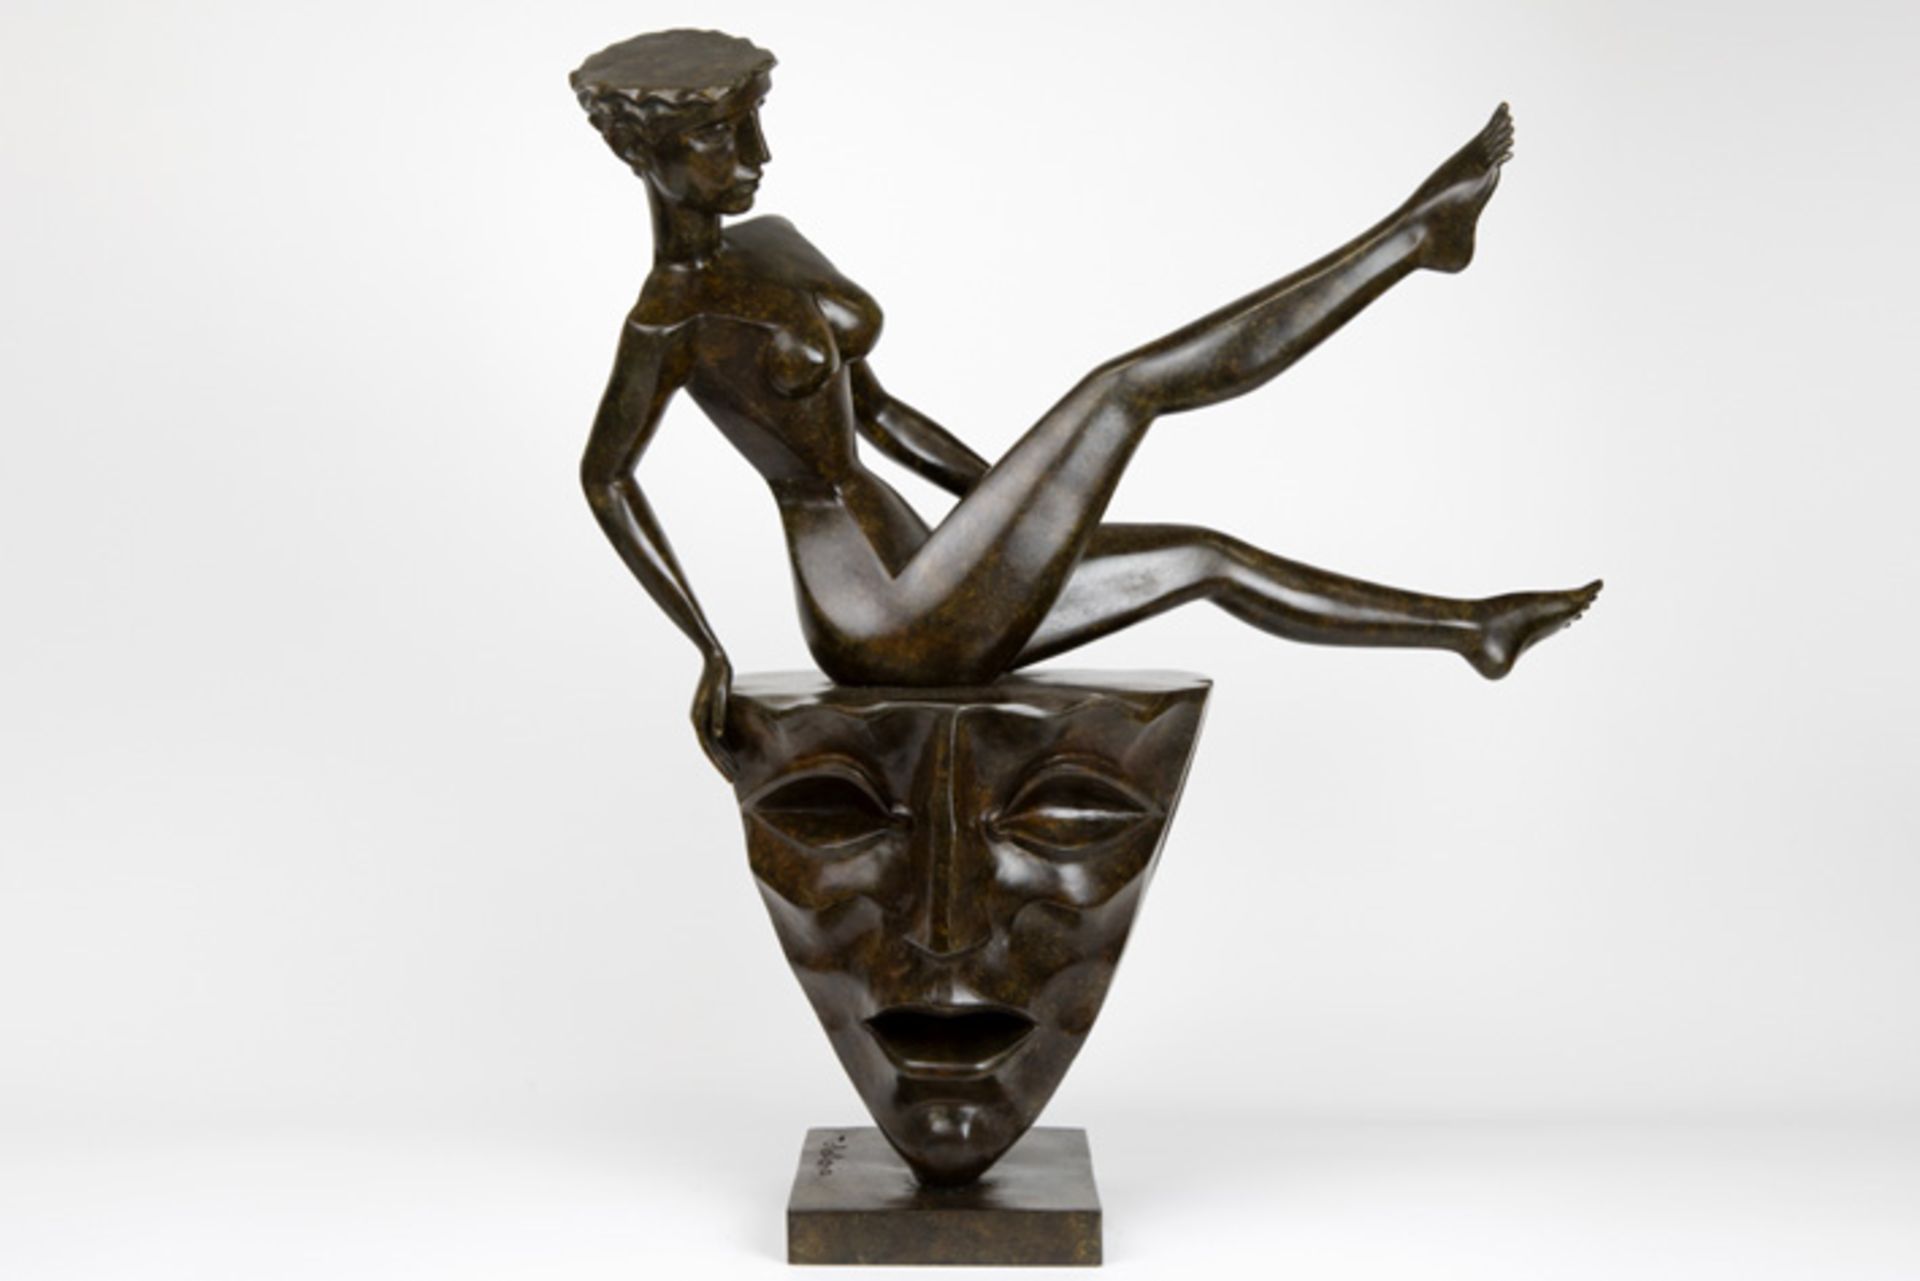 21st Cent. "Lady on the top" sculpture in bronze - signed Igor Tcholaria and with foundry mark